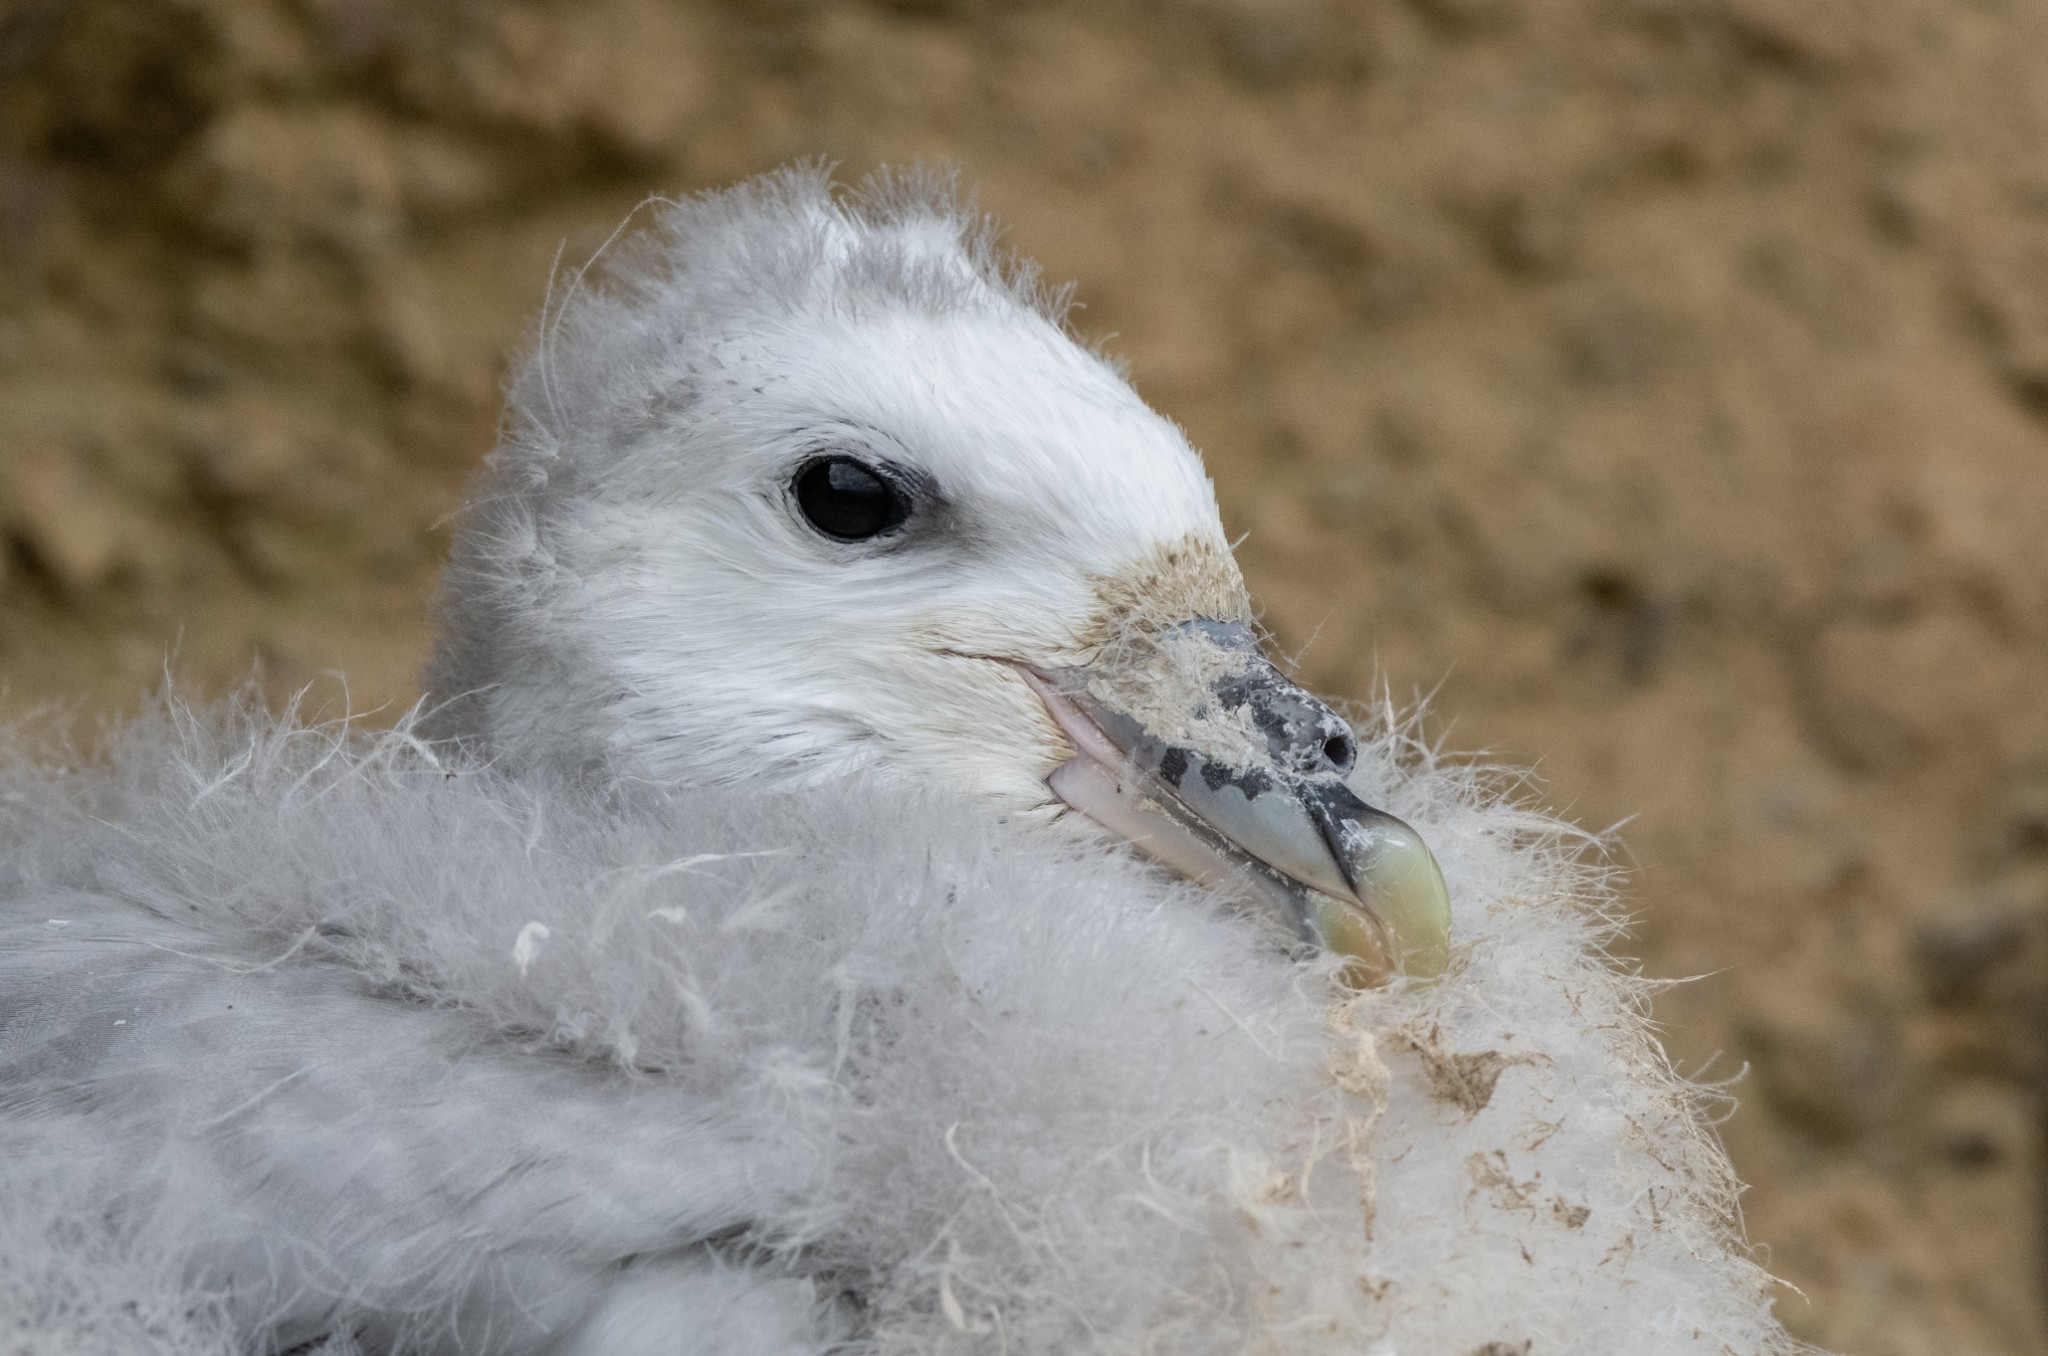 Fulmar chick in Orkney - image by Raymond Besant